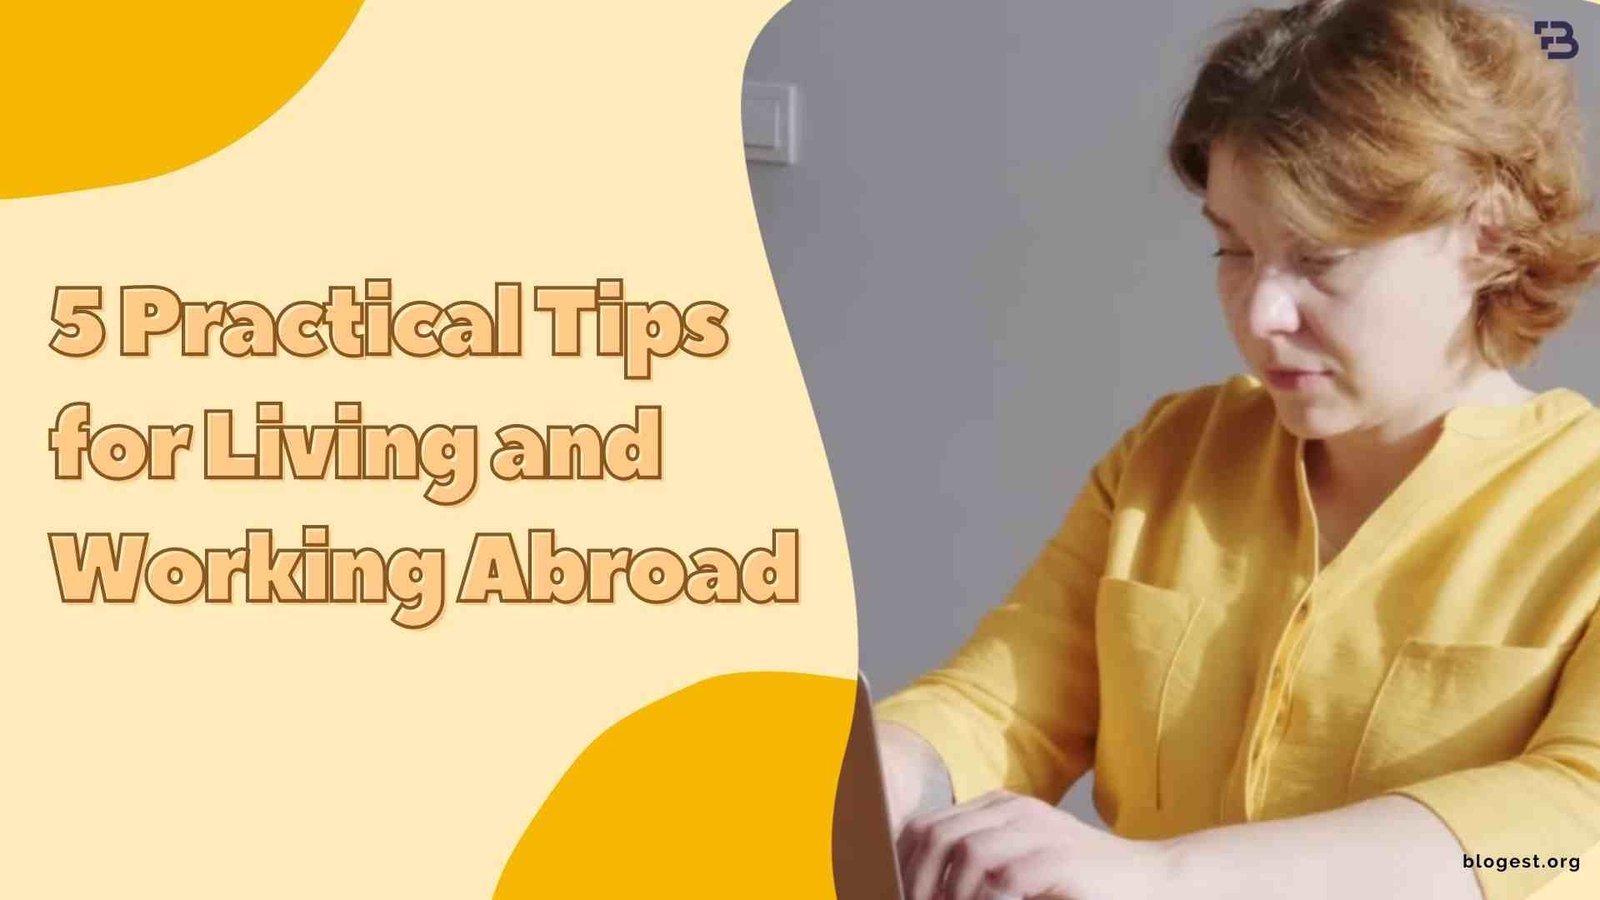 5 Practical Tips For Living and Working Abroad